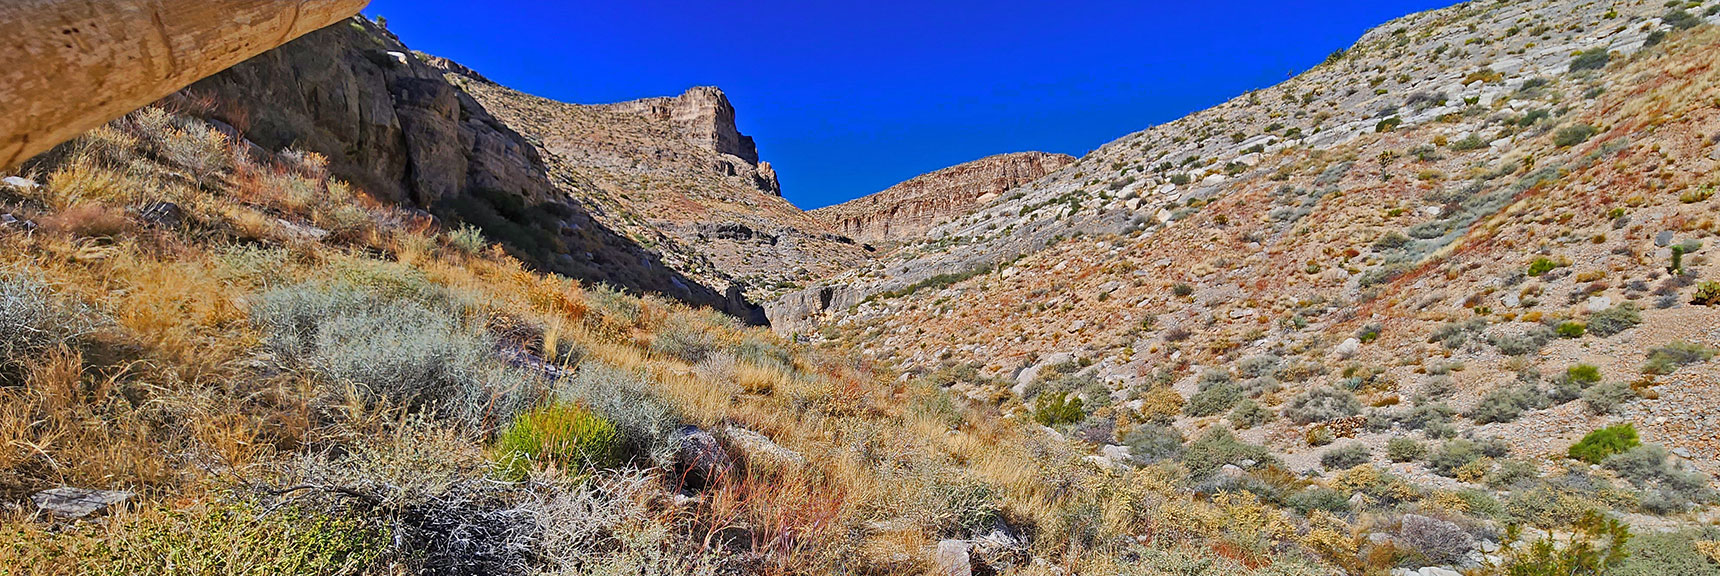 Road Ends. Trail Continues Toward Mule Spring. | Landmark Bluff | Lovell Canyon, Nevada